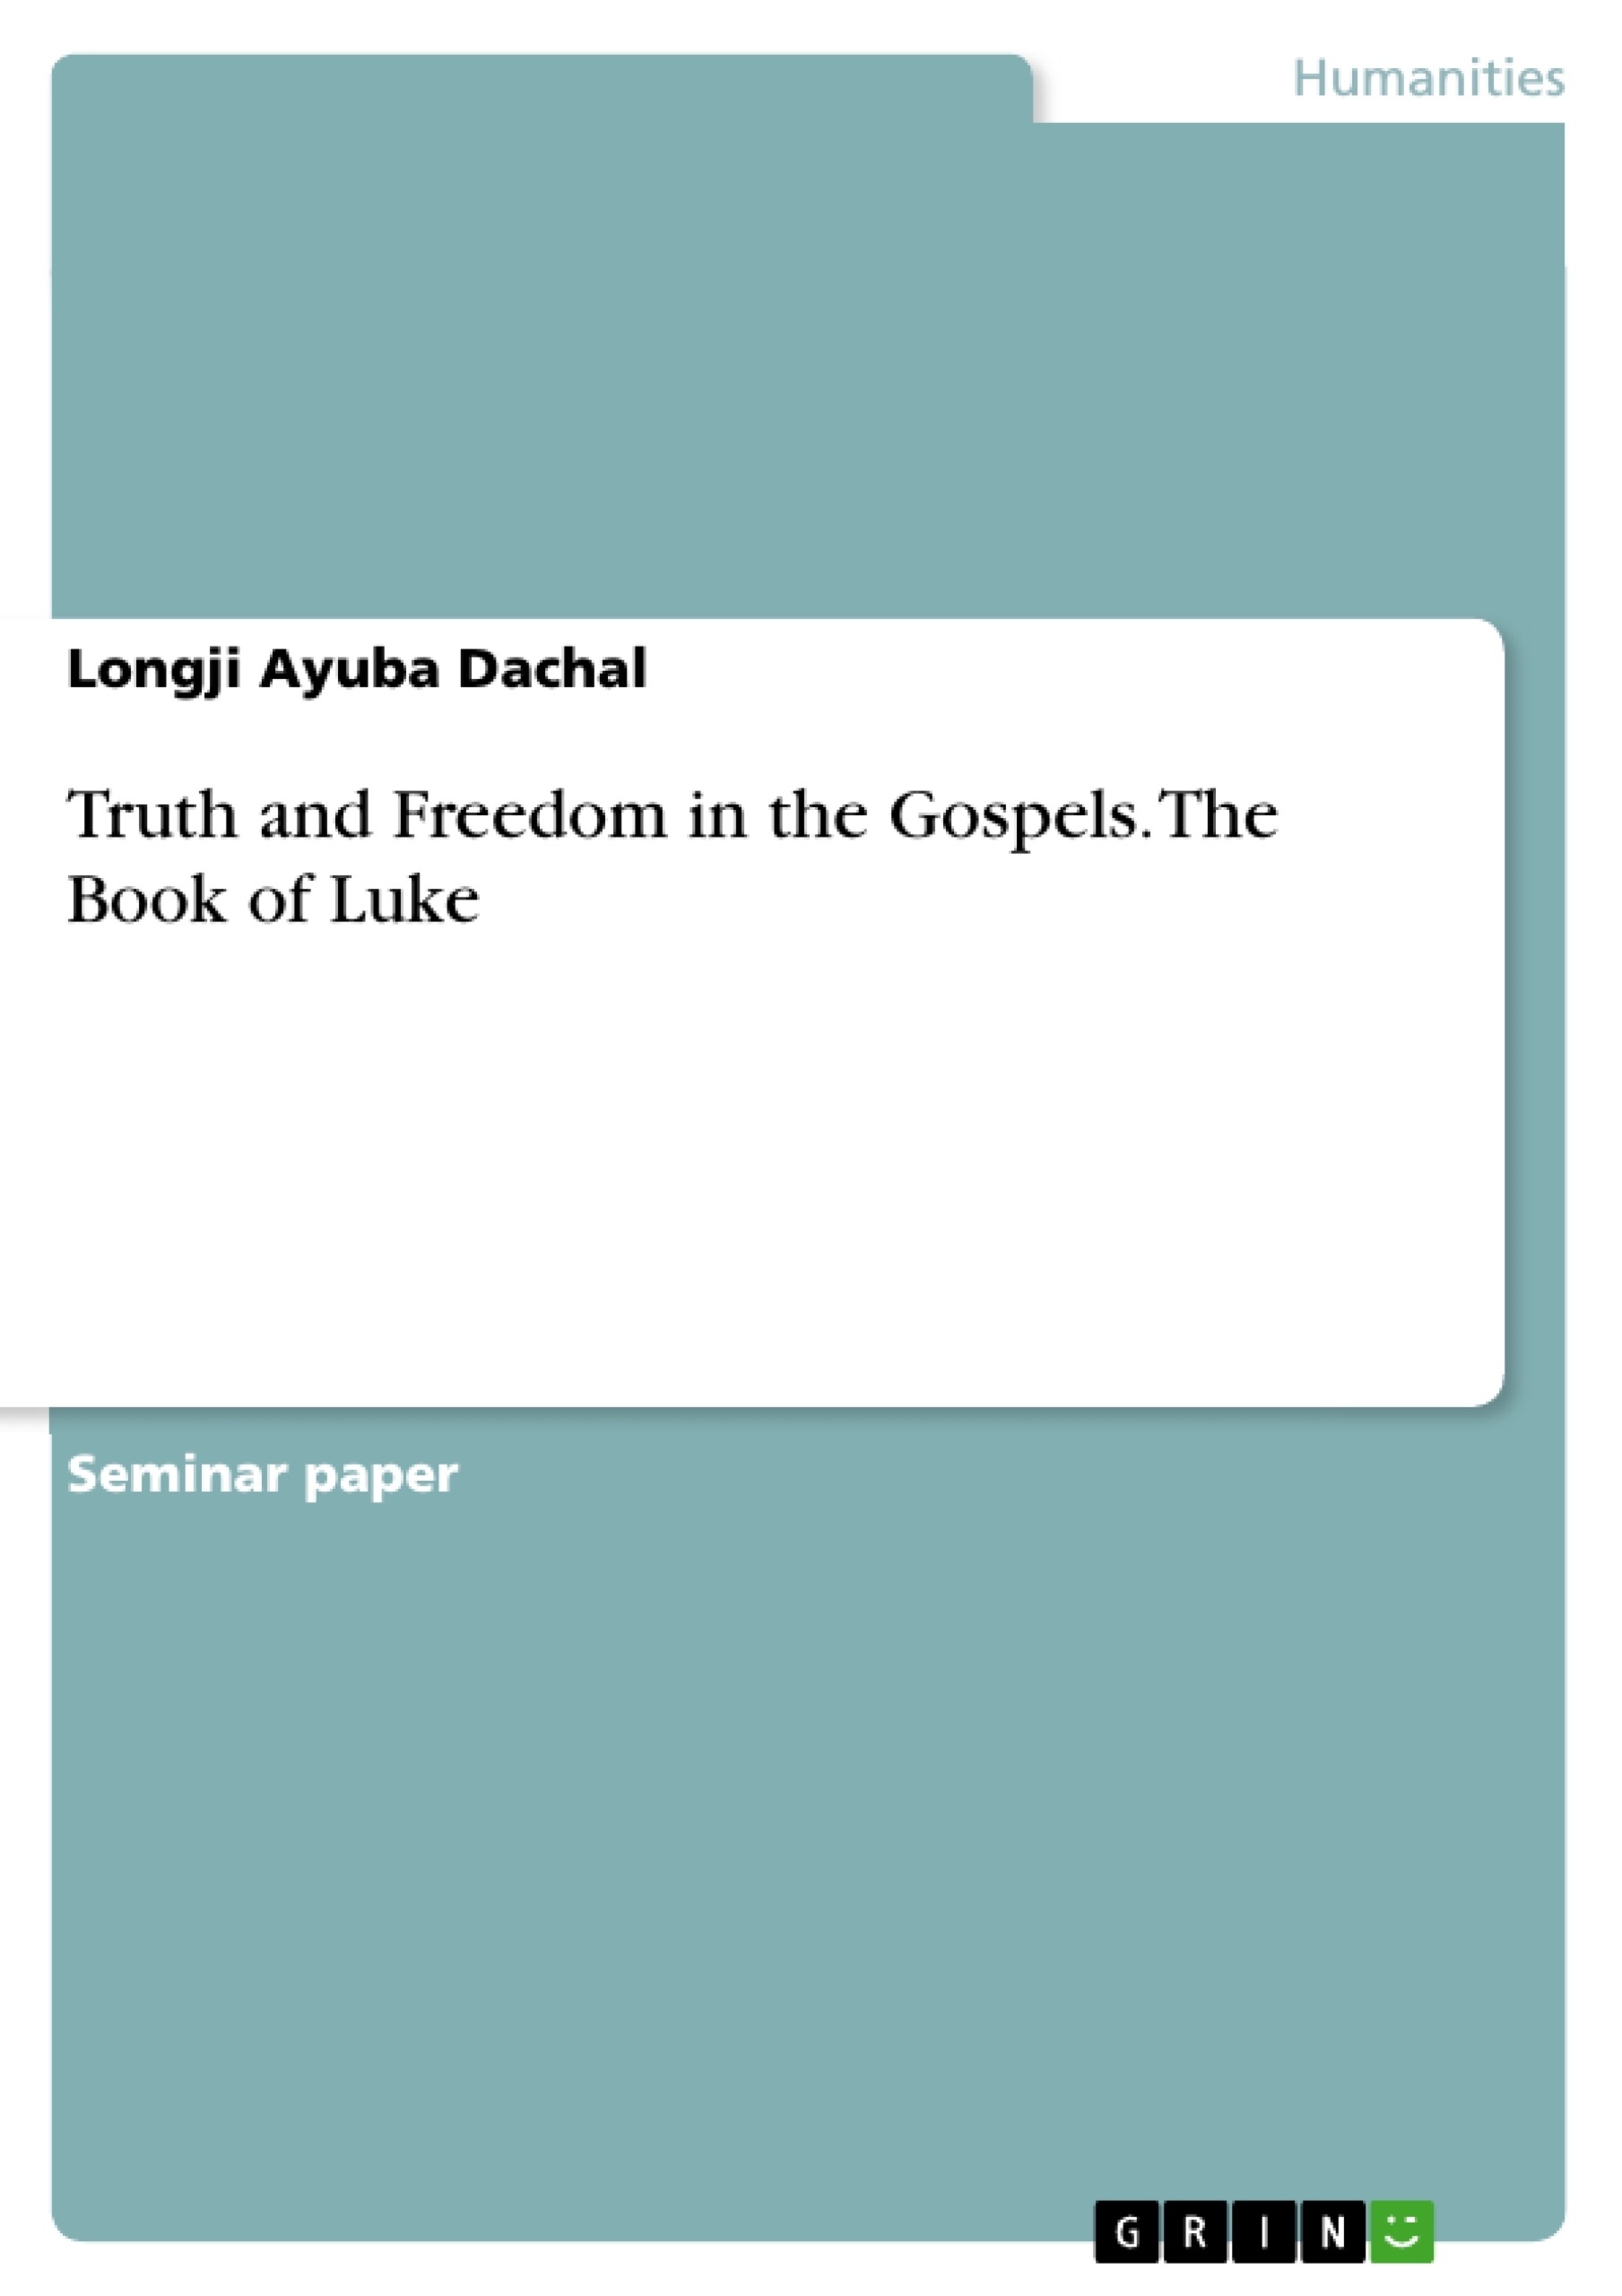 Título: Truth and Freedom in the Gospels. The Book of Luke